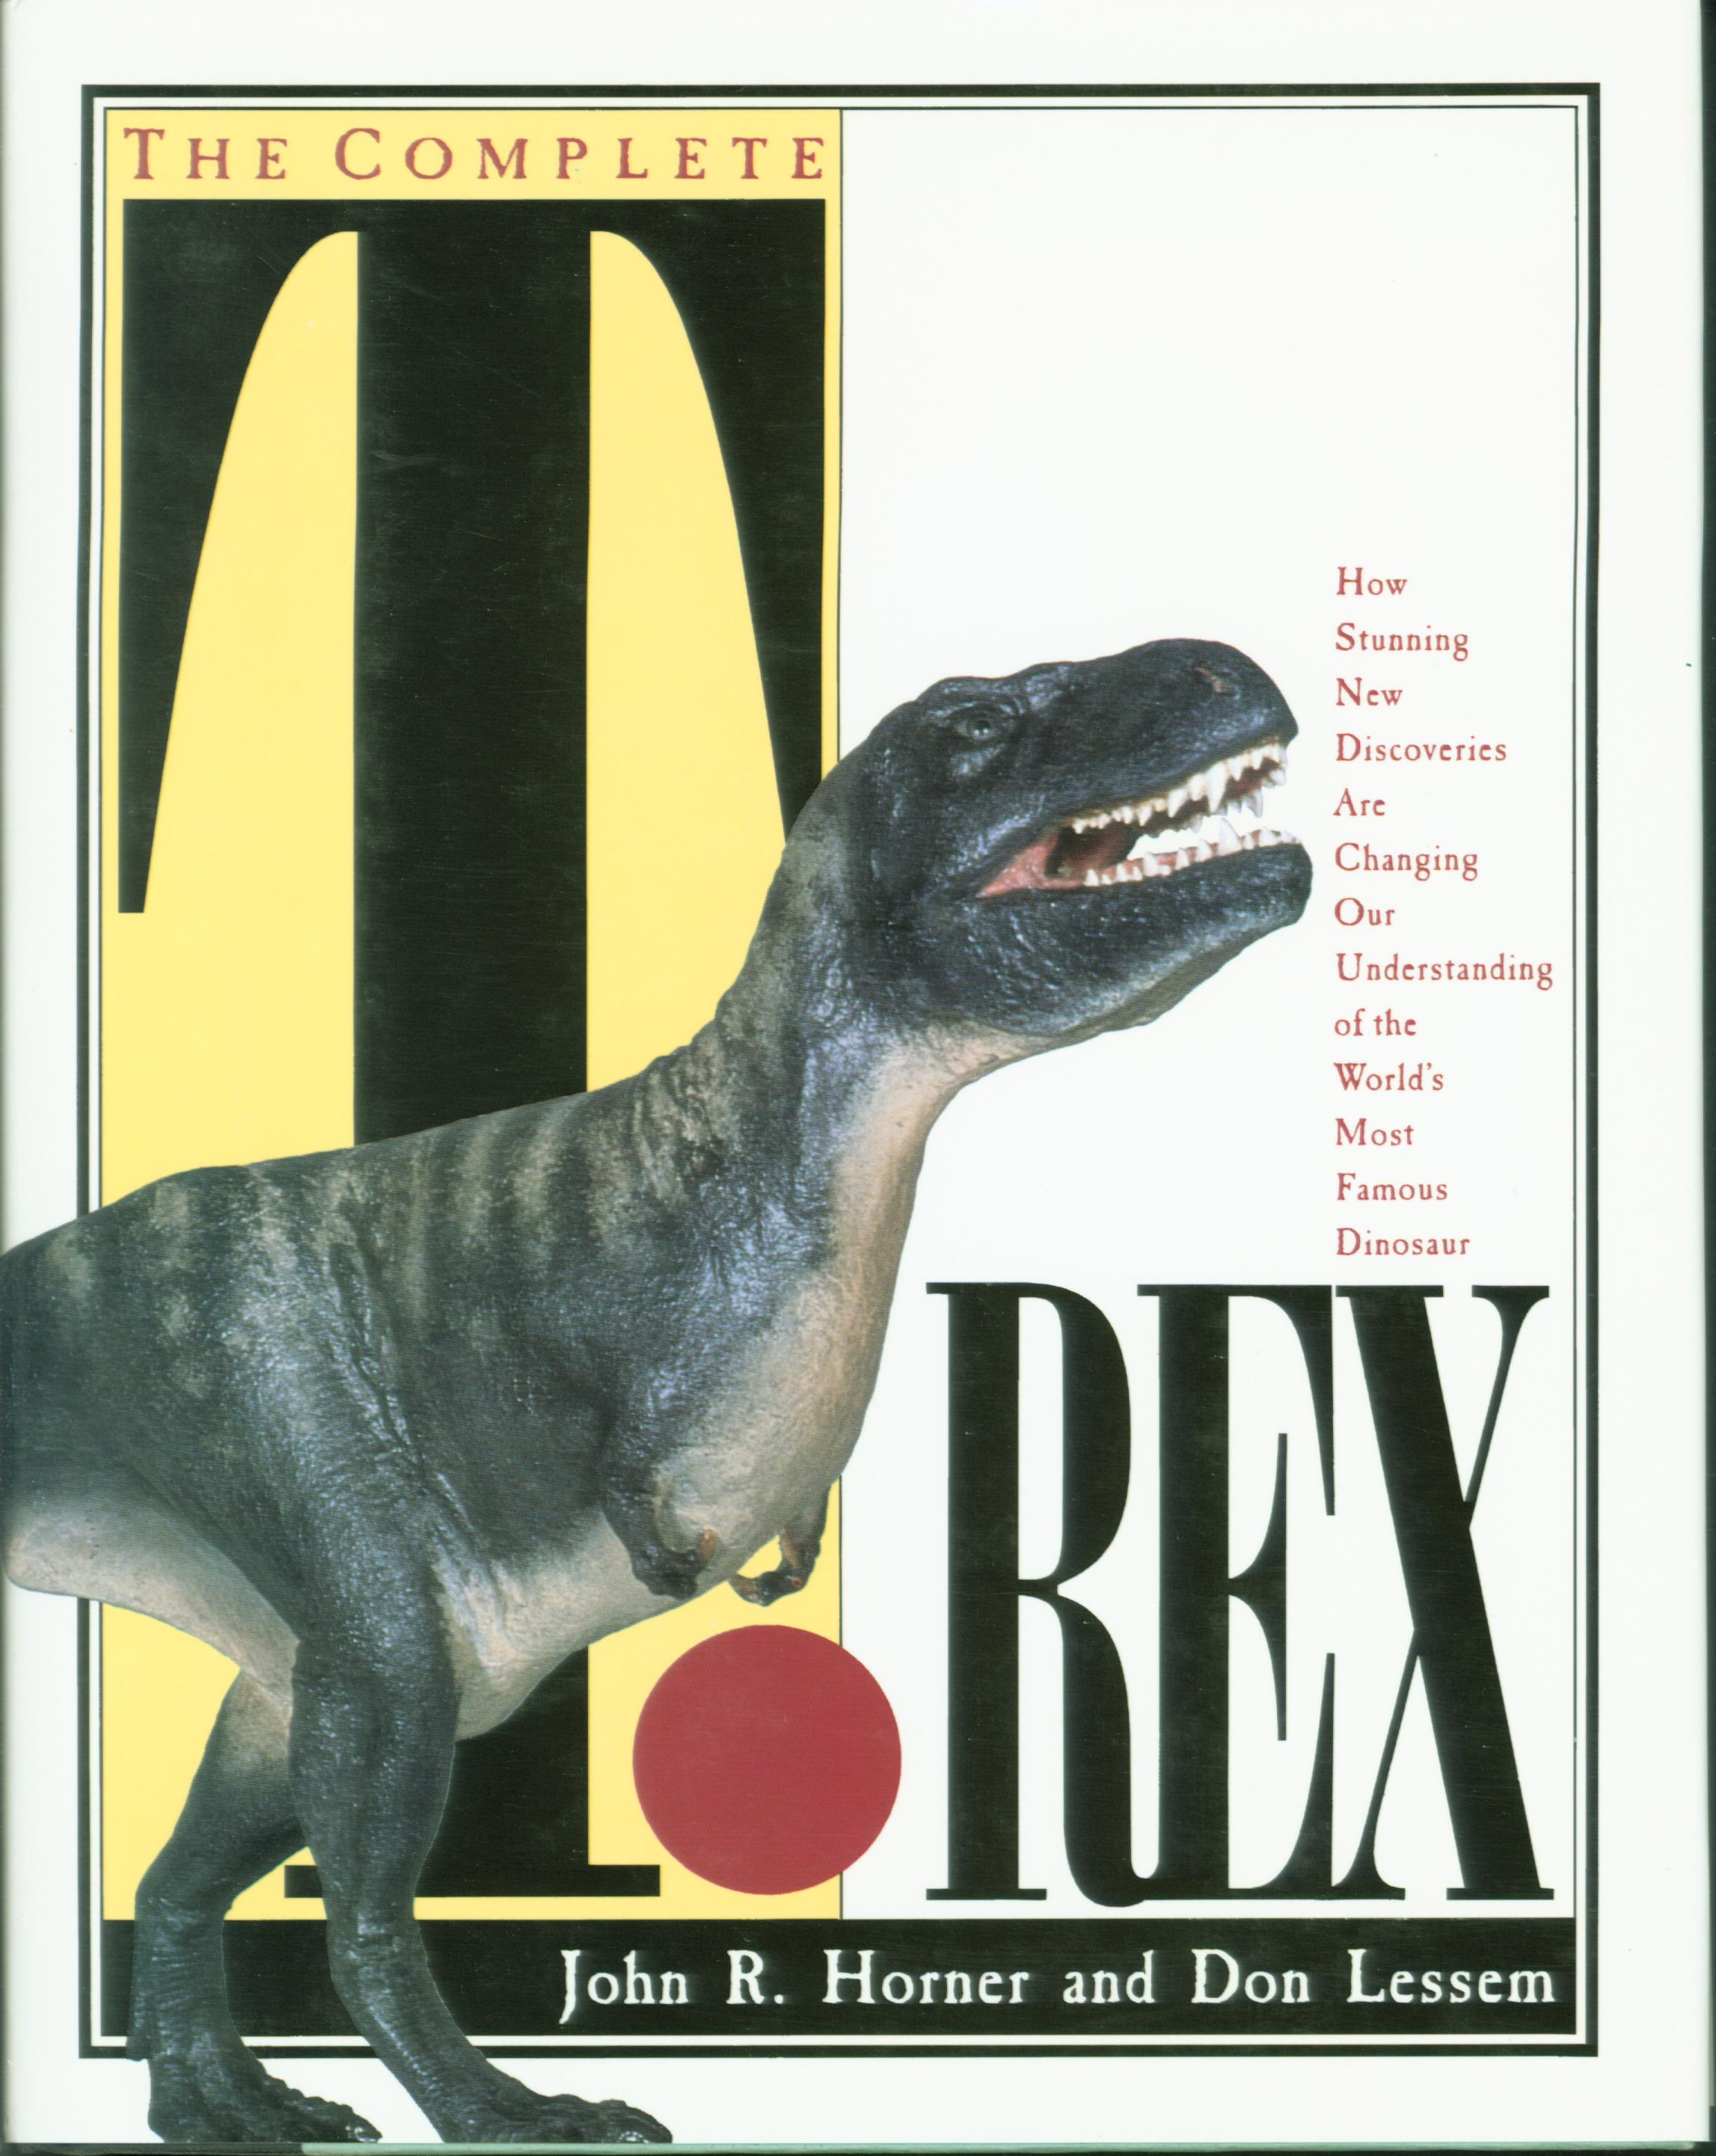 THE COMPLETE T. REX.